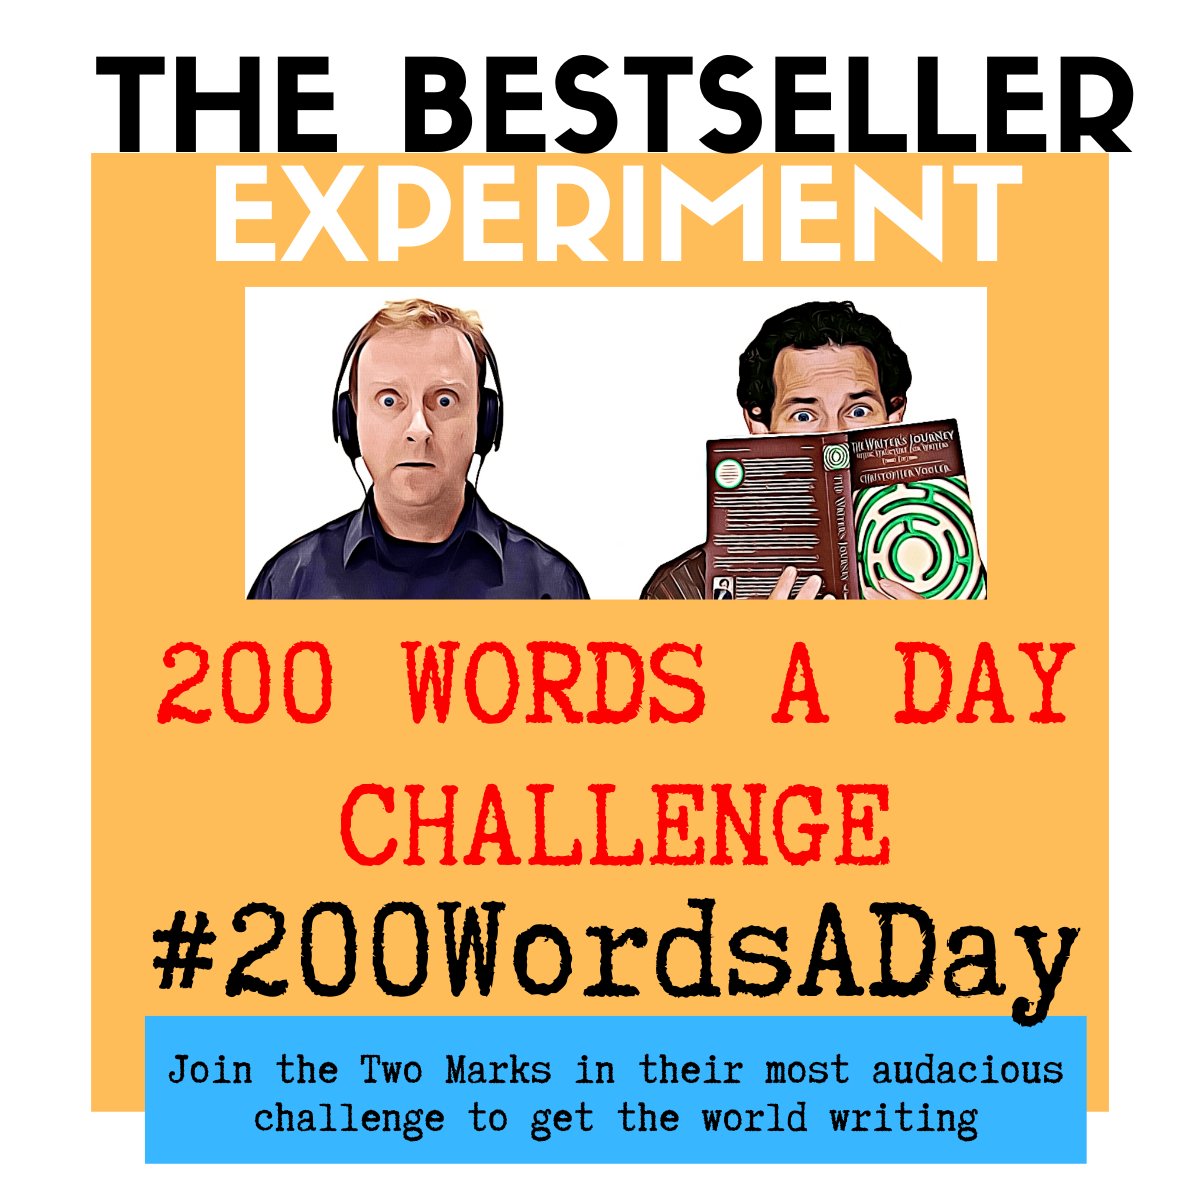 Want the writing habit of a lifetime? Sign up today to the FREE 200 Word A Day Challenge. #200WordsADay 200wordchallenge.com #BXP